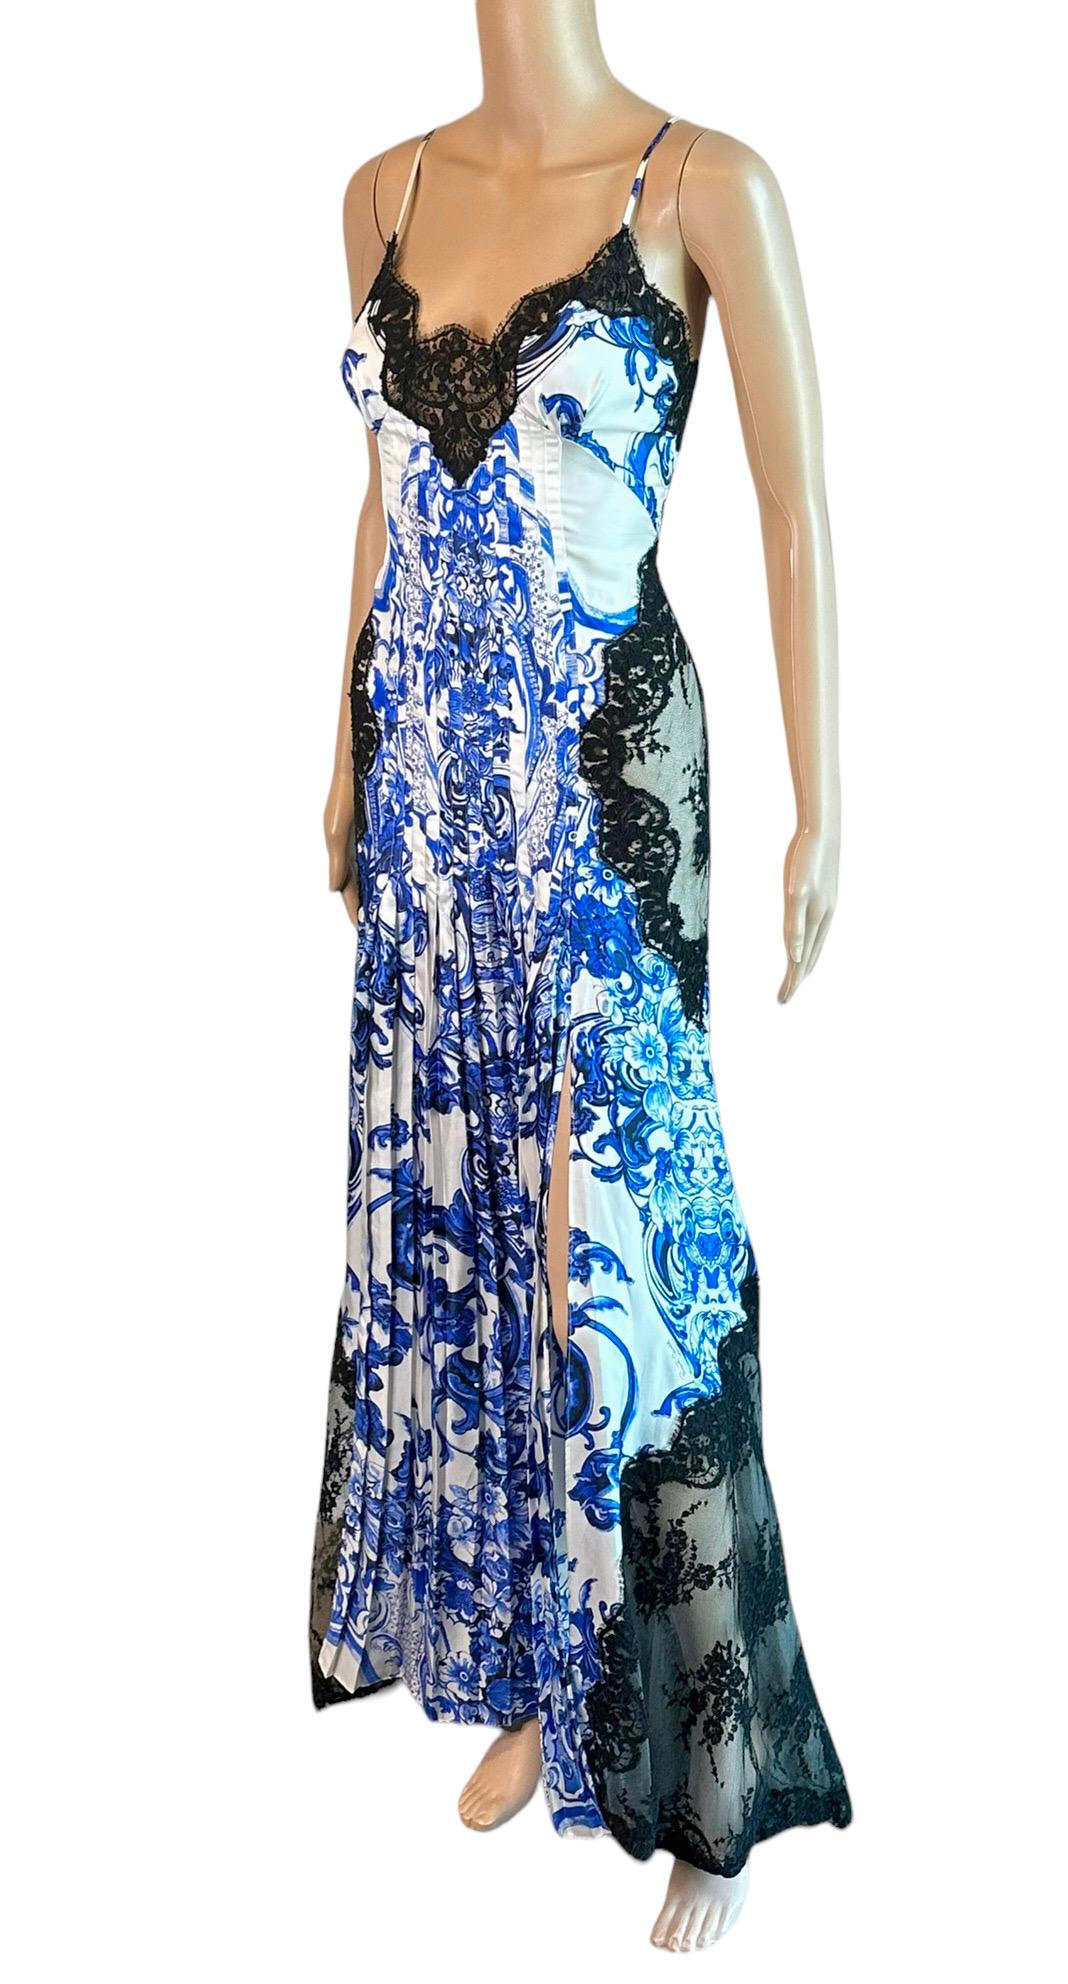 Roberto Cavalli Resort 2013 Chinoiserie Ming Porcelain Sheer Lace Evening Dress In Good Condition For Sale In Naples, FL